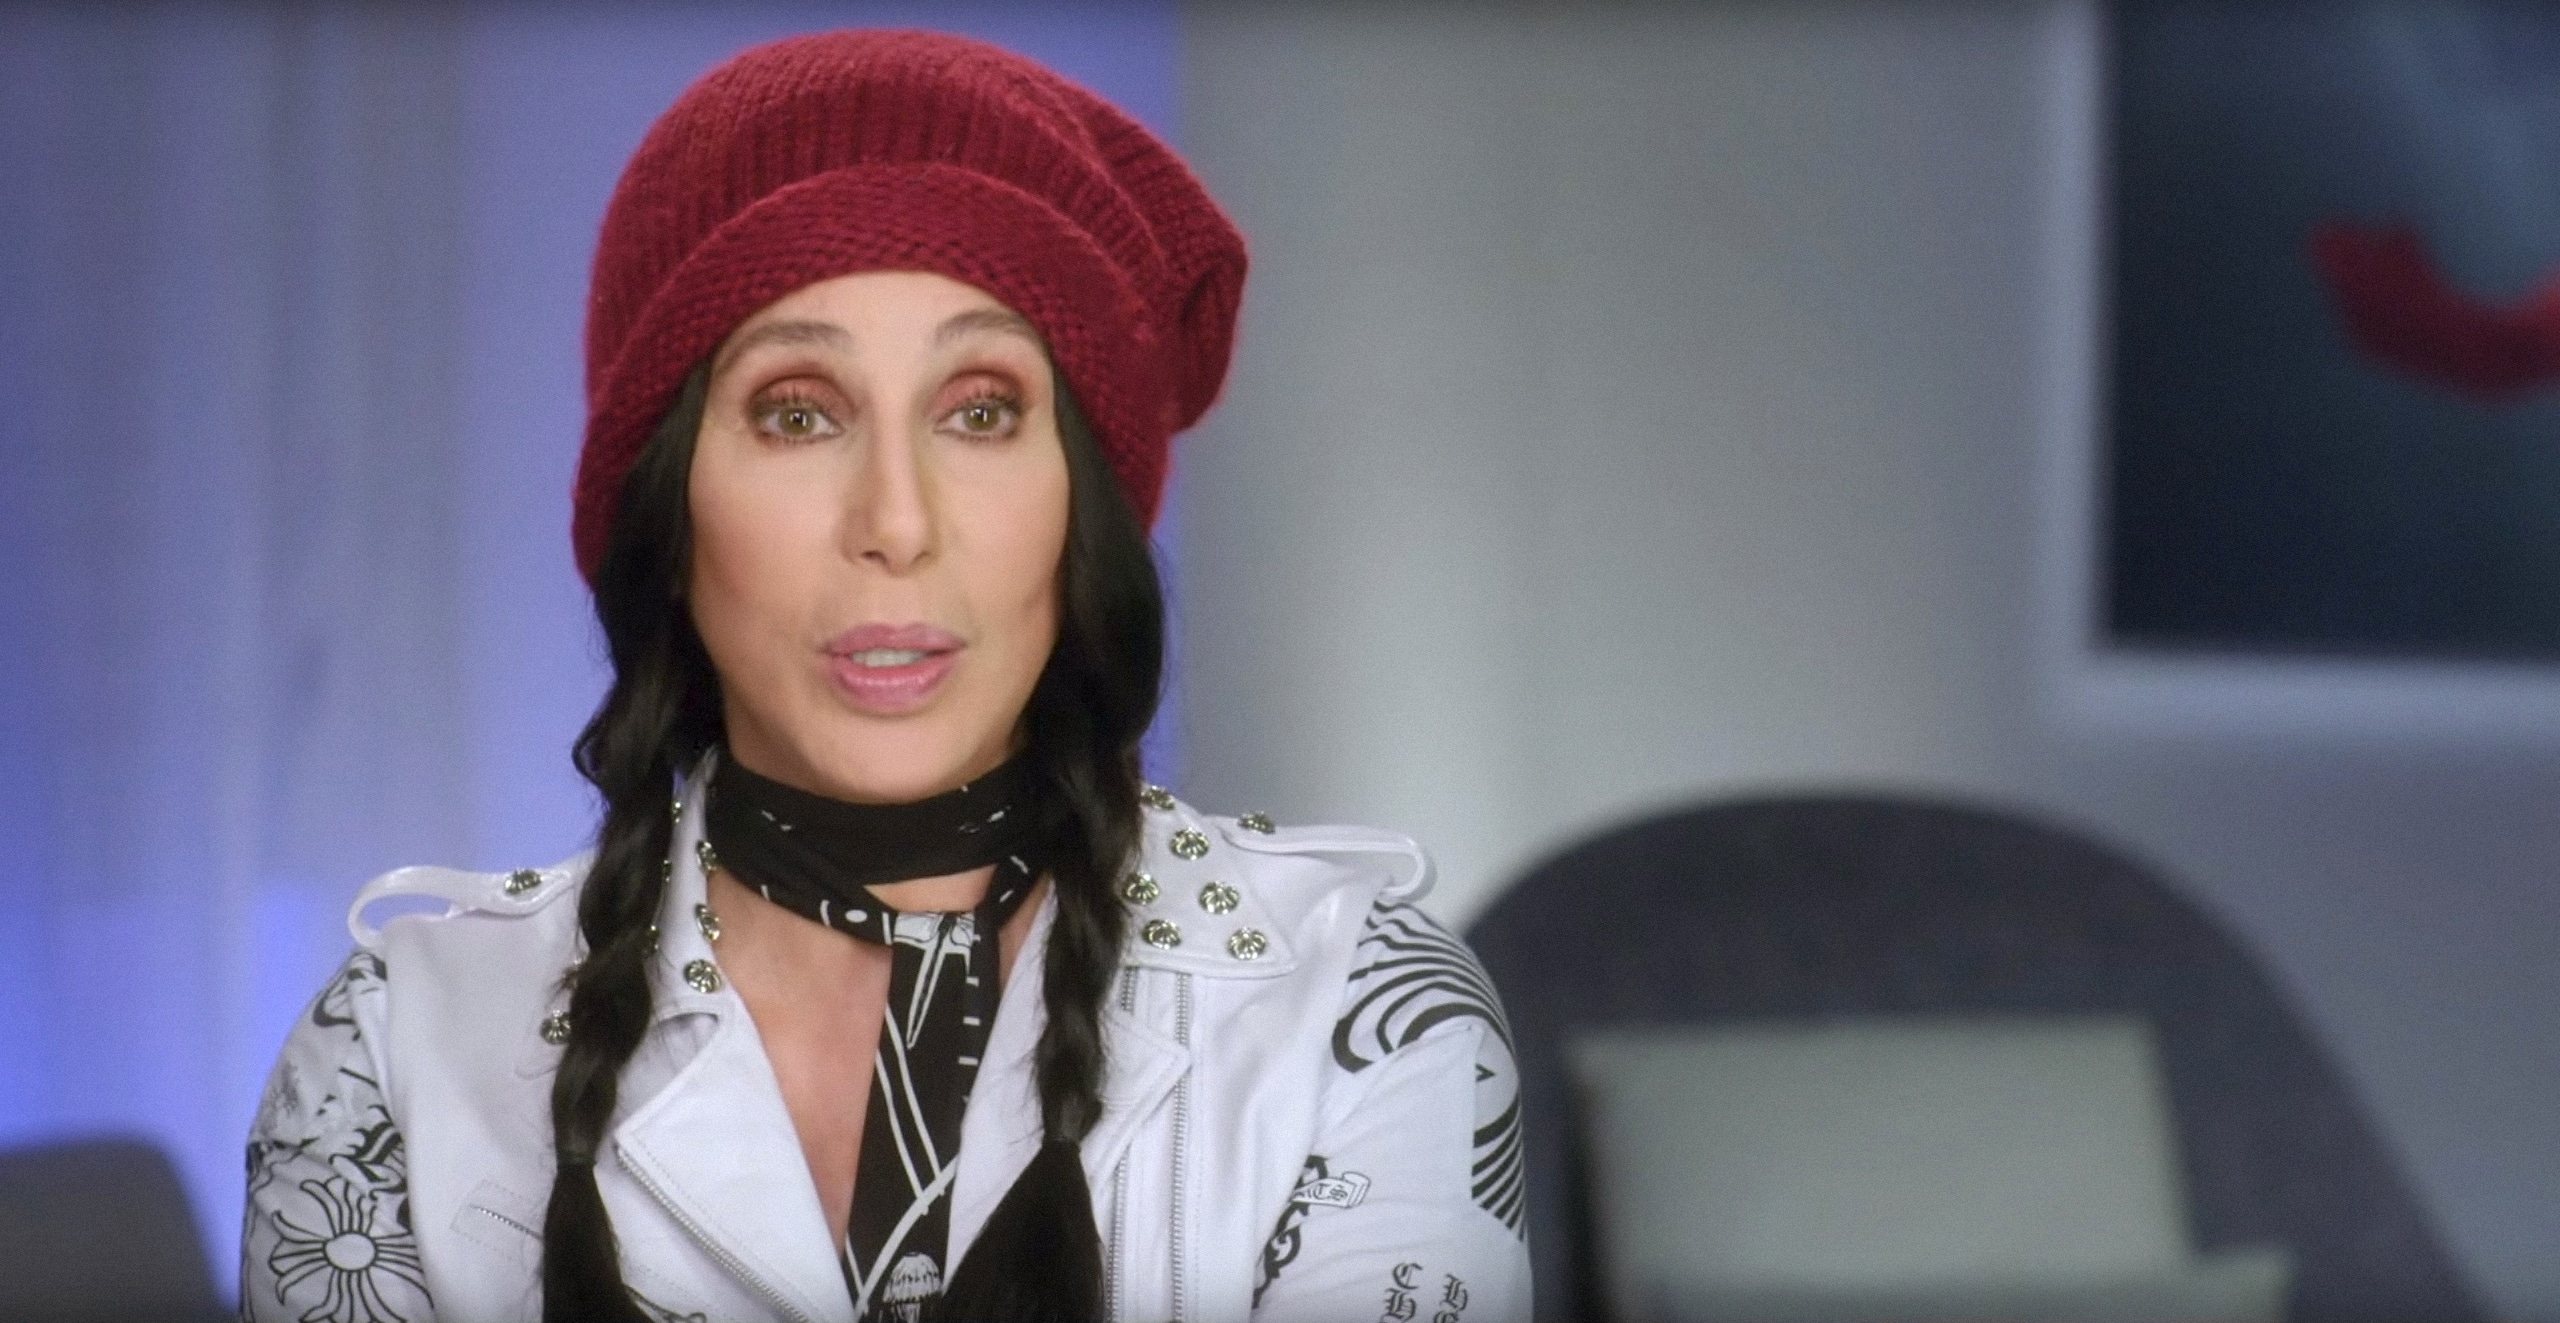 LARGER THAN LIFE: THE KEVYN AUCOIN STORY, Cher, 2018